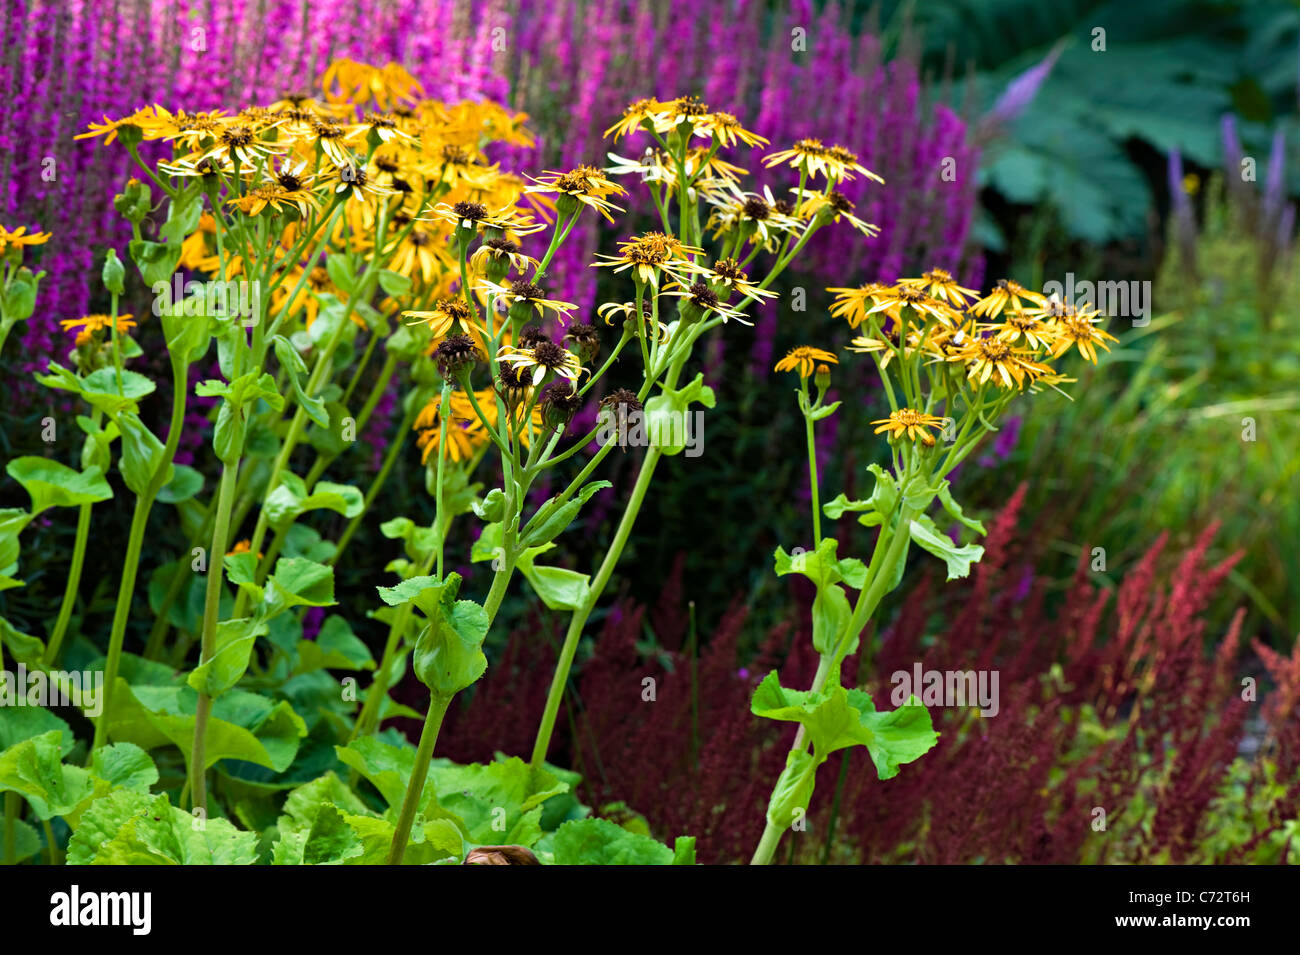 Close-up image of the summer flowering Ligularia yellow flowers in a hot border. Stock Photo